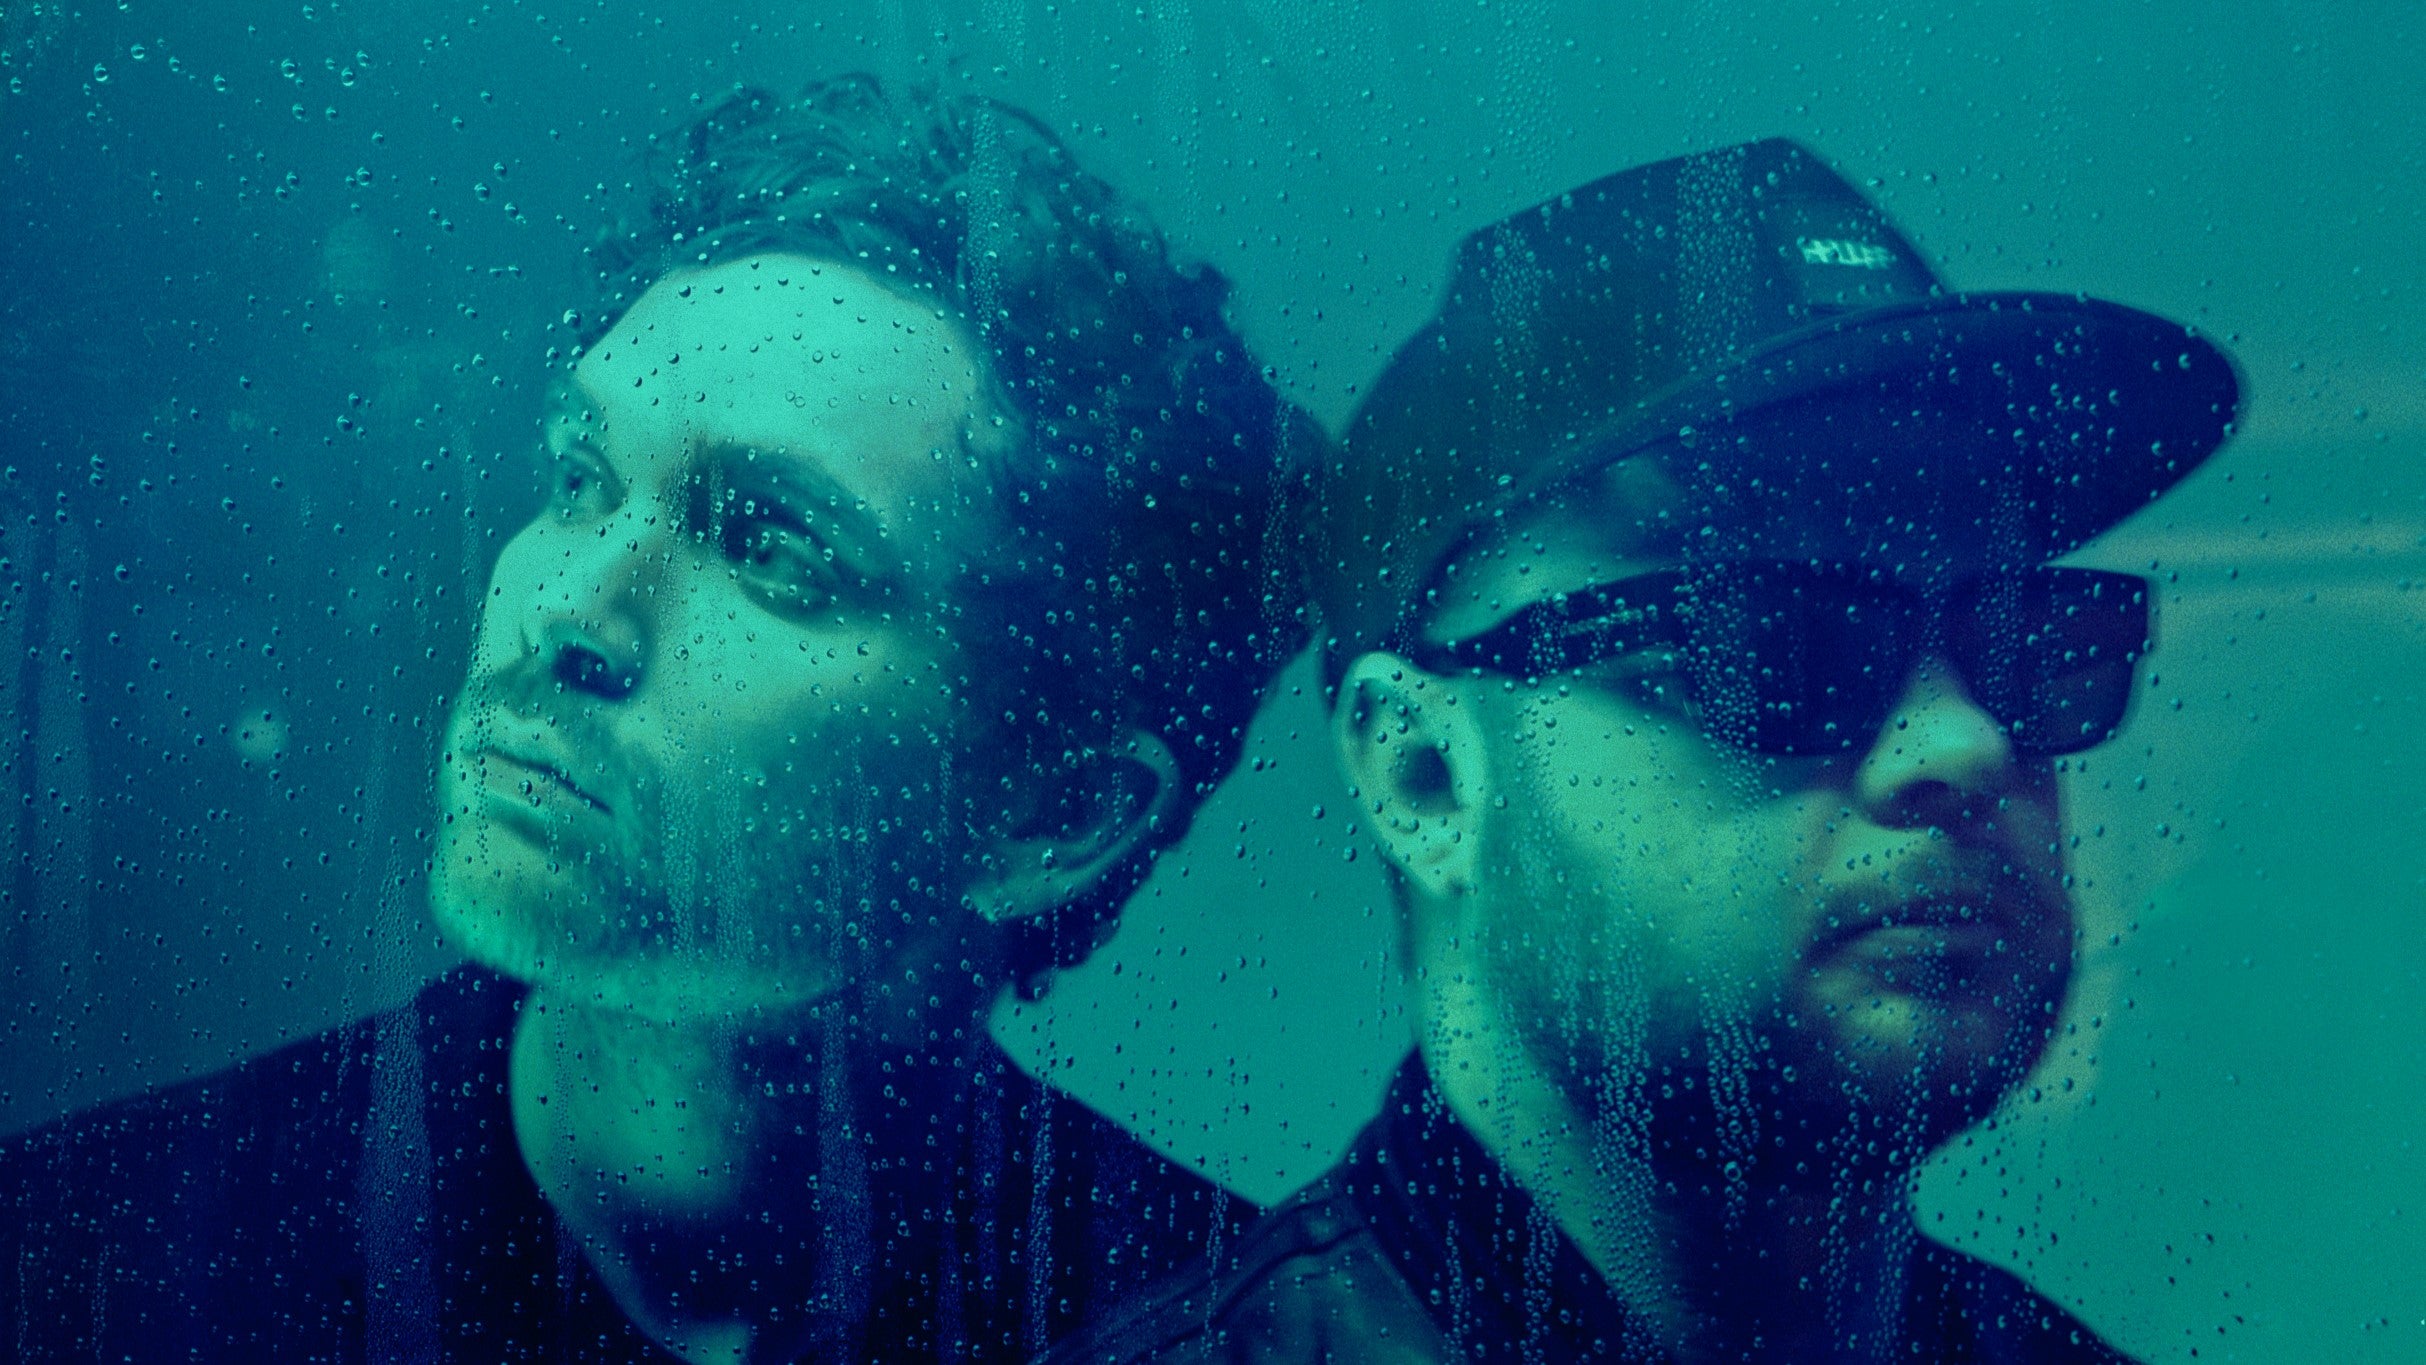 Royal Blood free presale c0de for early tickets in St Louis